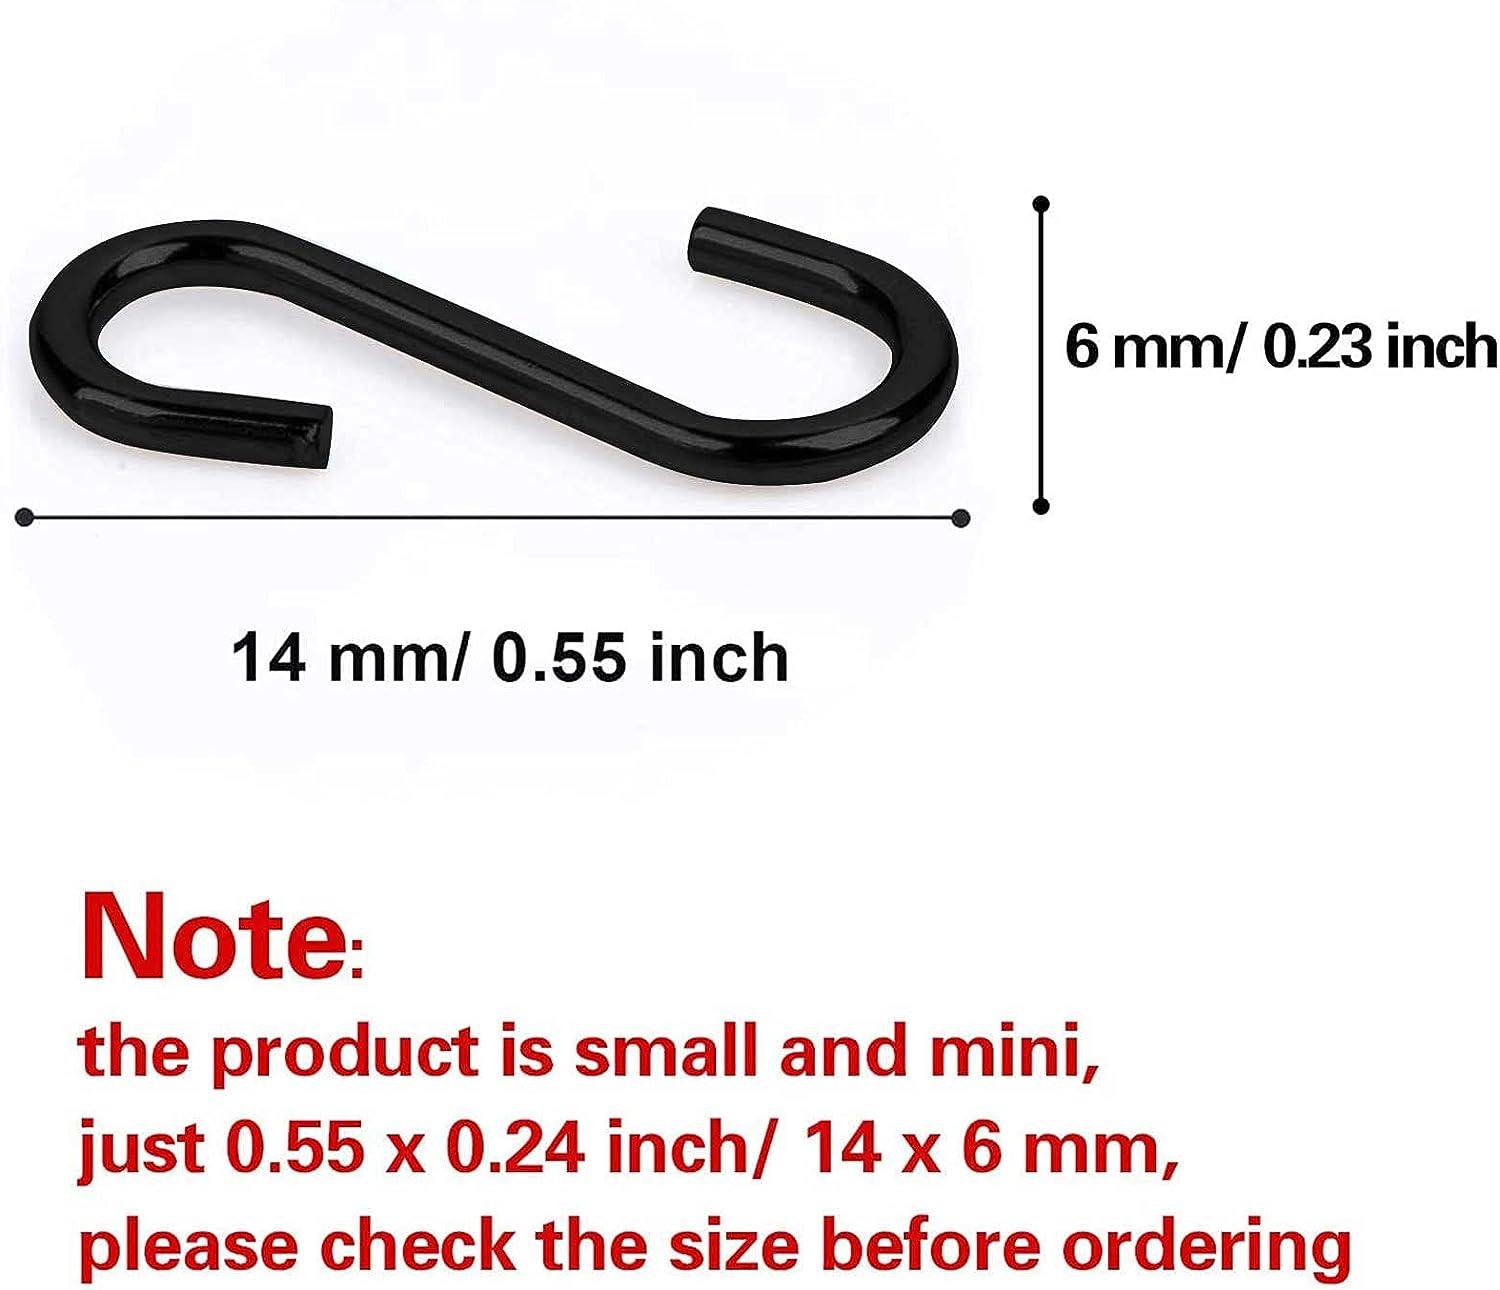 Shappy 200 Pieces 0.55 Inch Mini S Hooks Connectors S-Shaped Wire Hook with  Storage Box for DIY Crafts, Hanging Jewelry, Key Chain, Tags (Black)